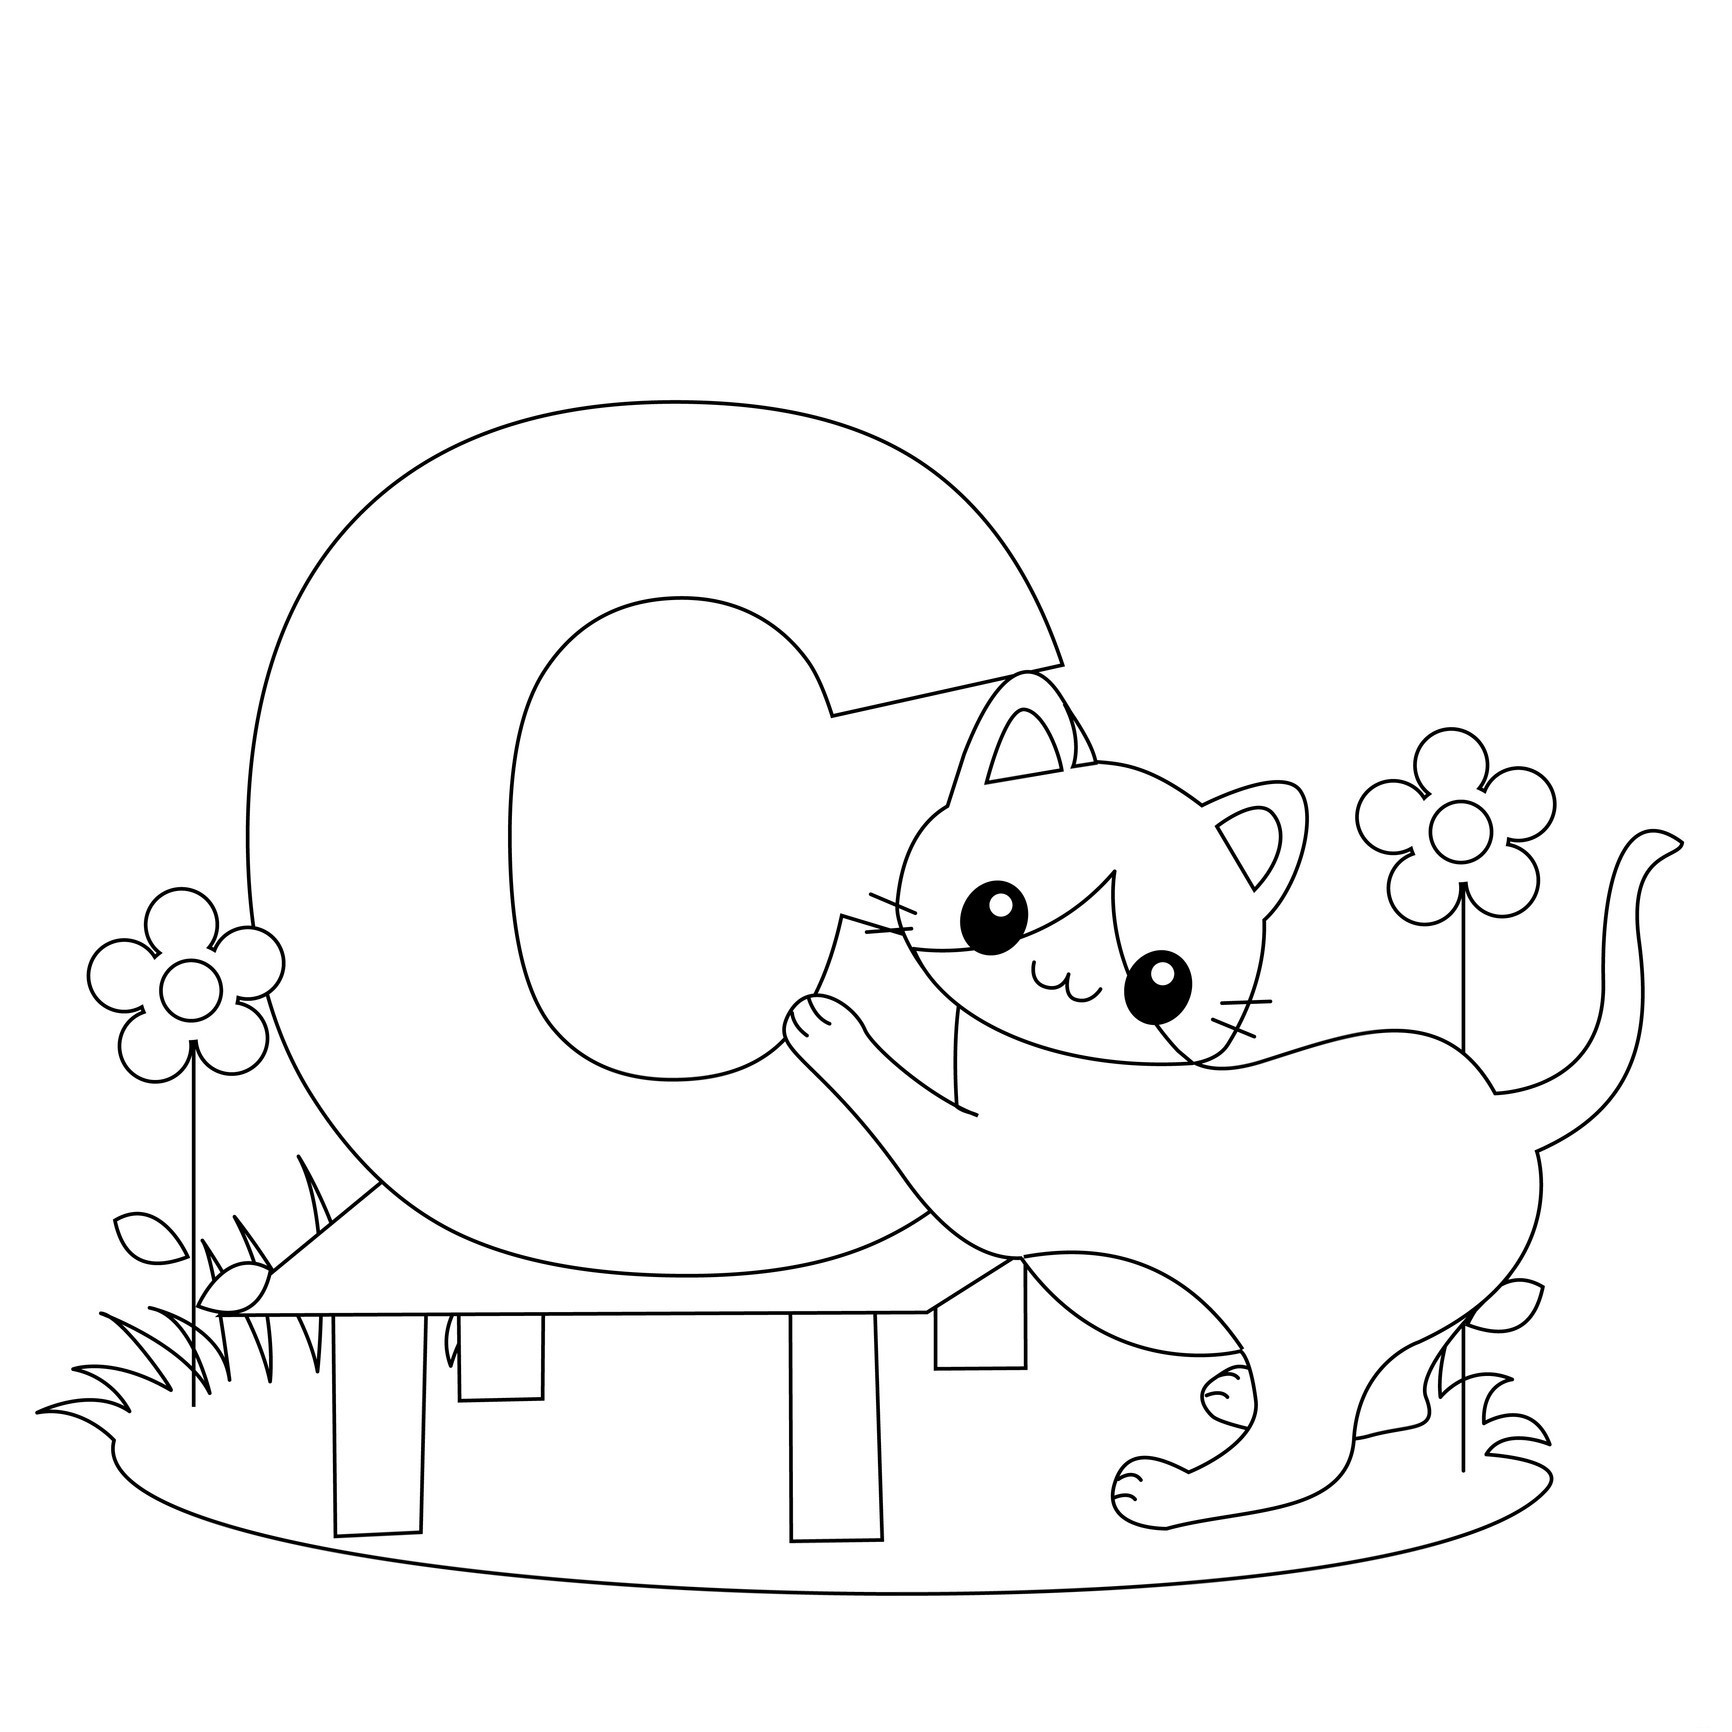 Abc Coloring Pages Free Printable
 Free Printable Alphabet Coloring Pages for Kids Best